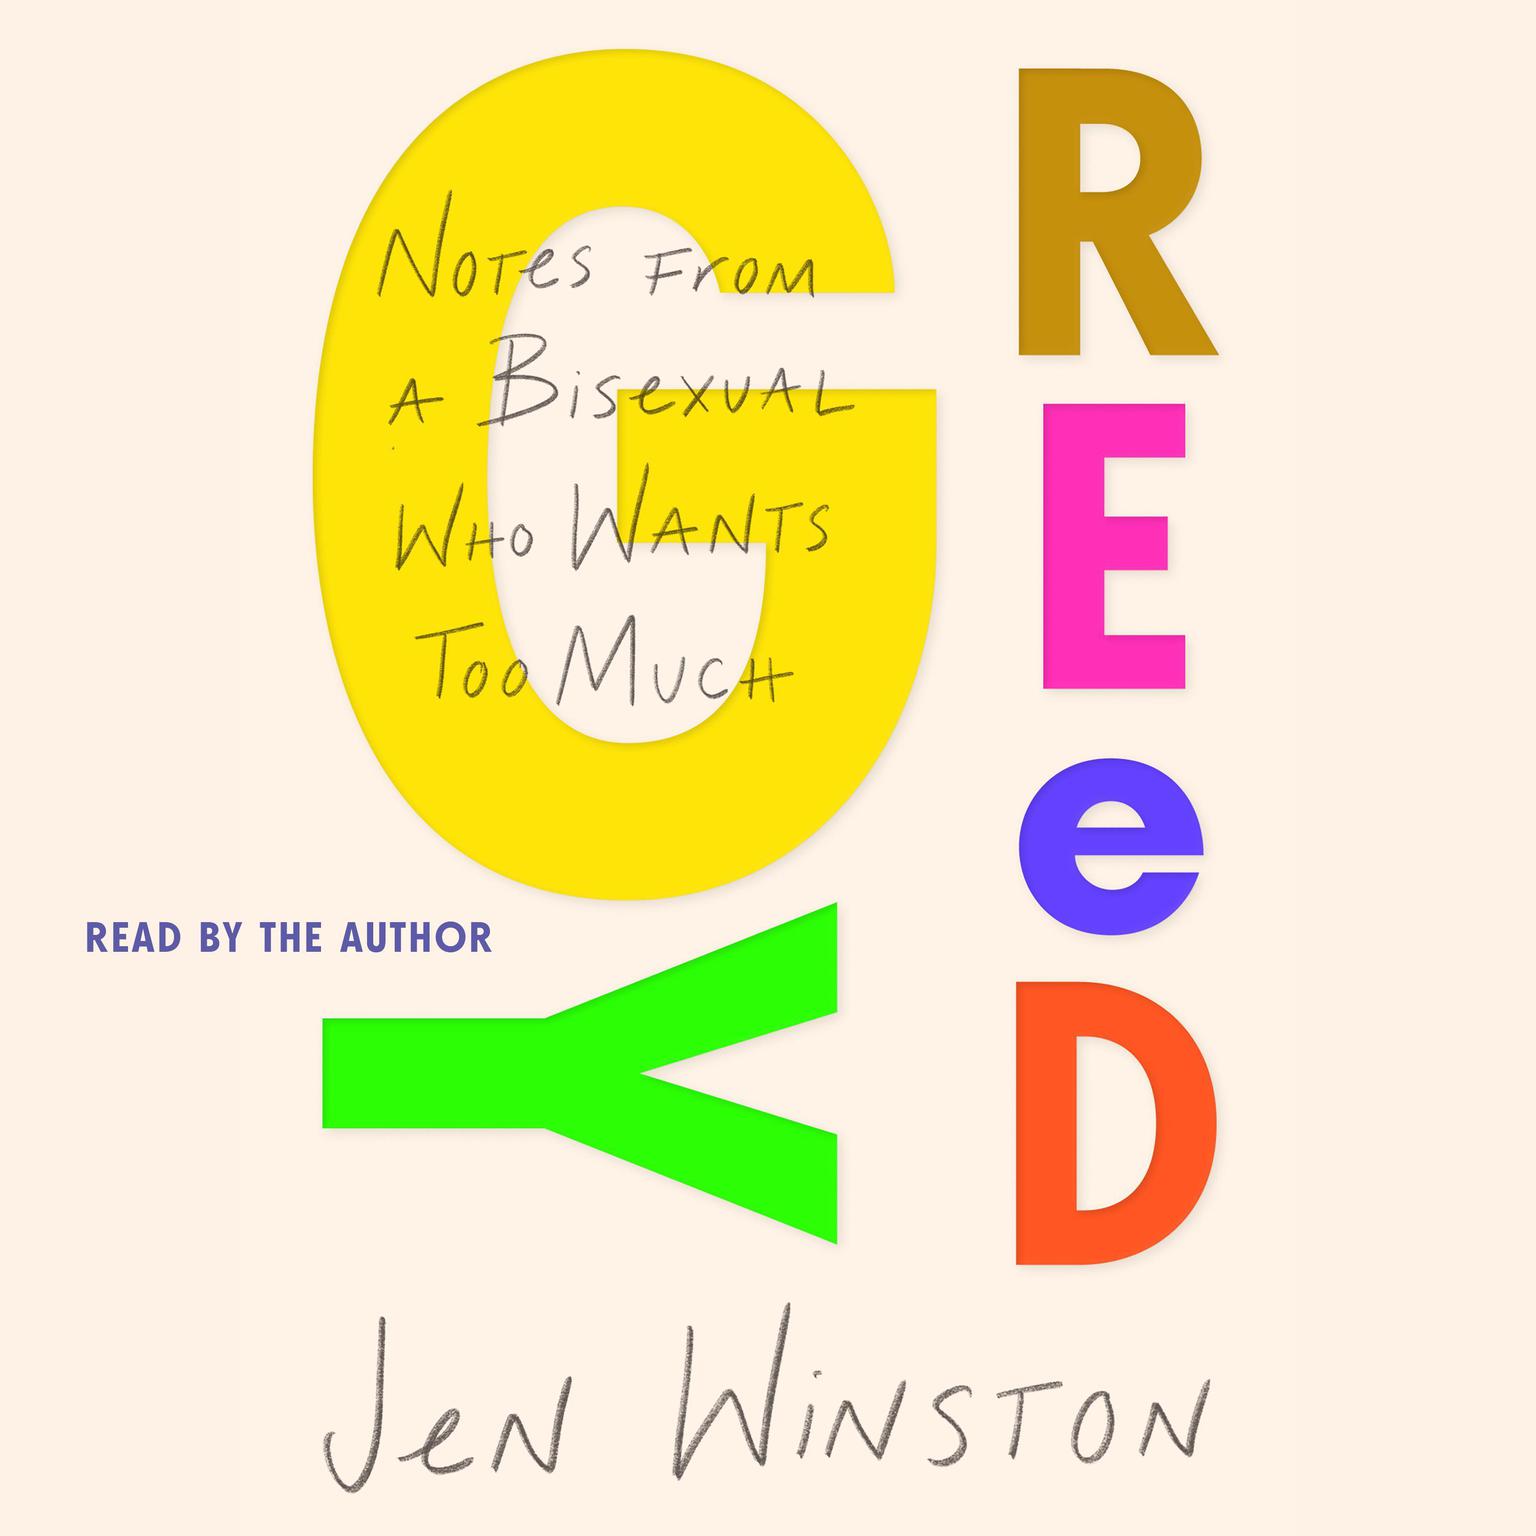 Greedy: Notes from a Bisexual Who Wants Too Much: Notes from a Bisexual Who Wants Too Much Audiobook, by Jen Winston